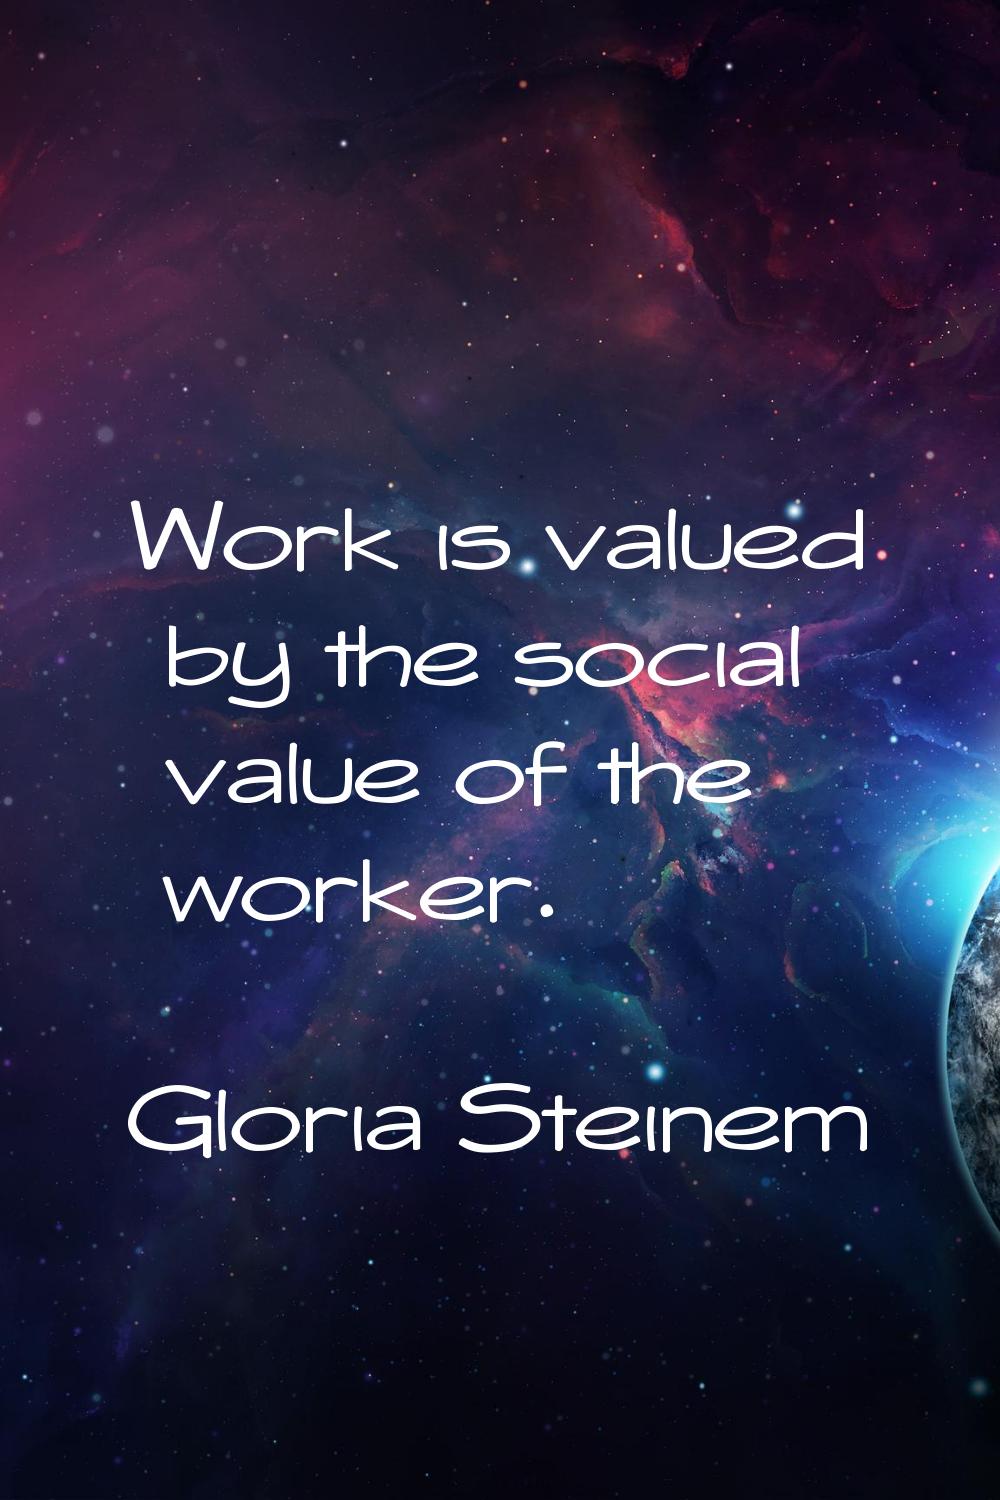 Work is valued by the social value of the worker.